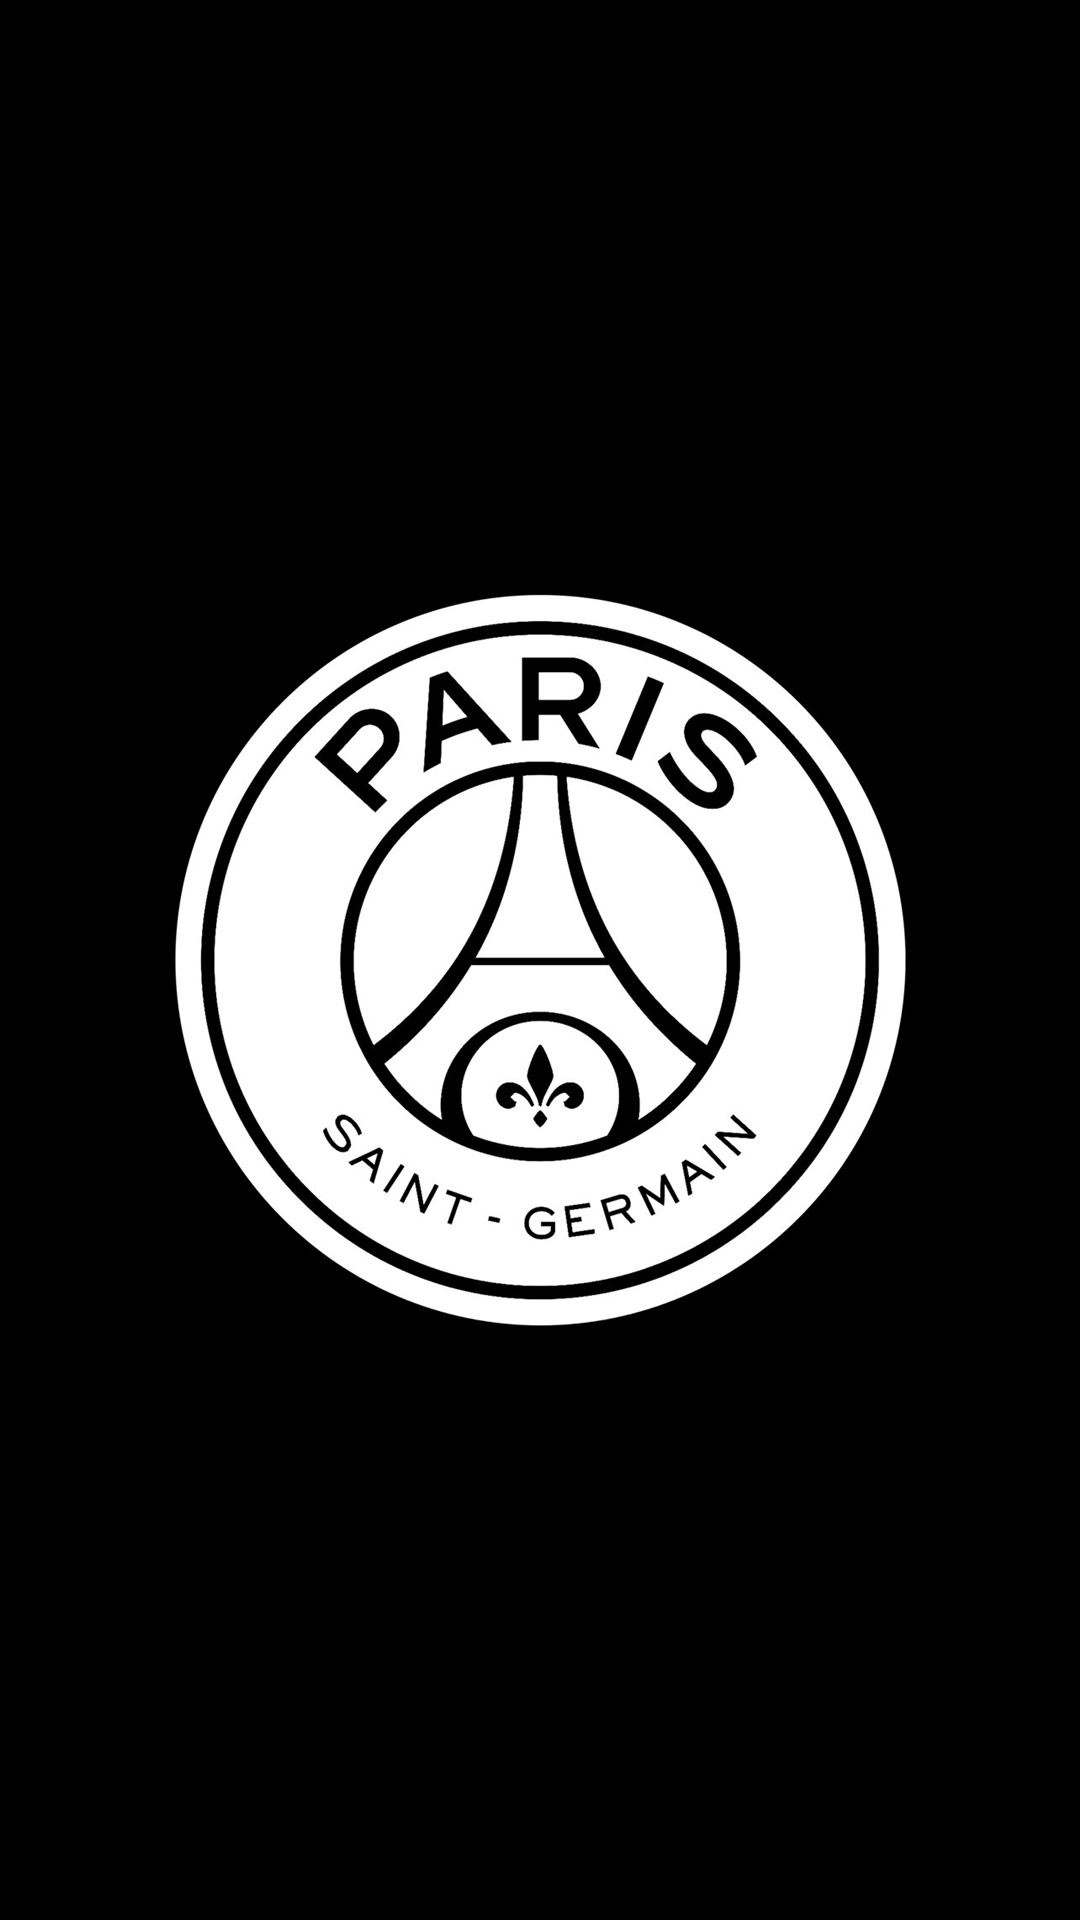 Paris Saint-Germain: The most famous and richest club in France. 1080x1920 Full HD Wallpaper.